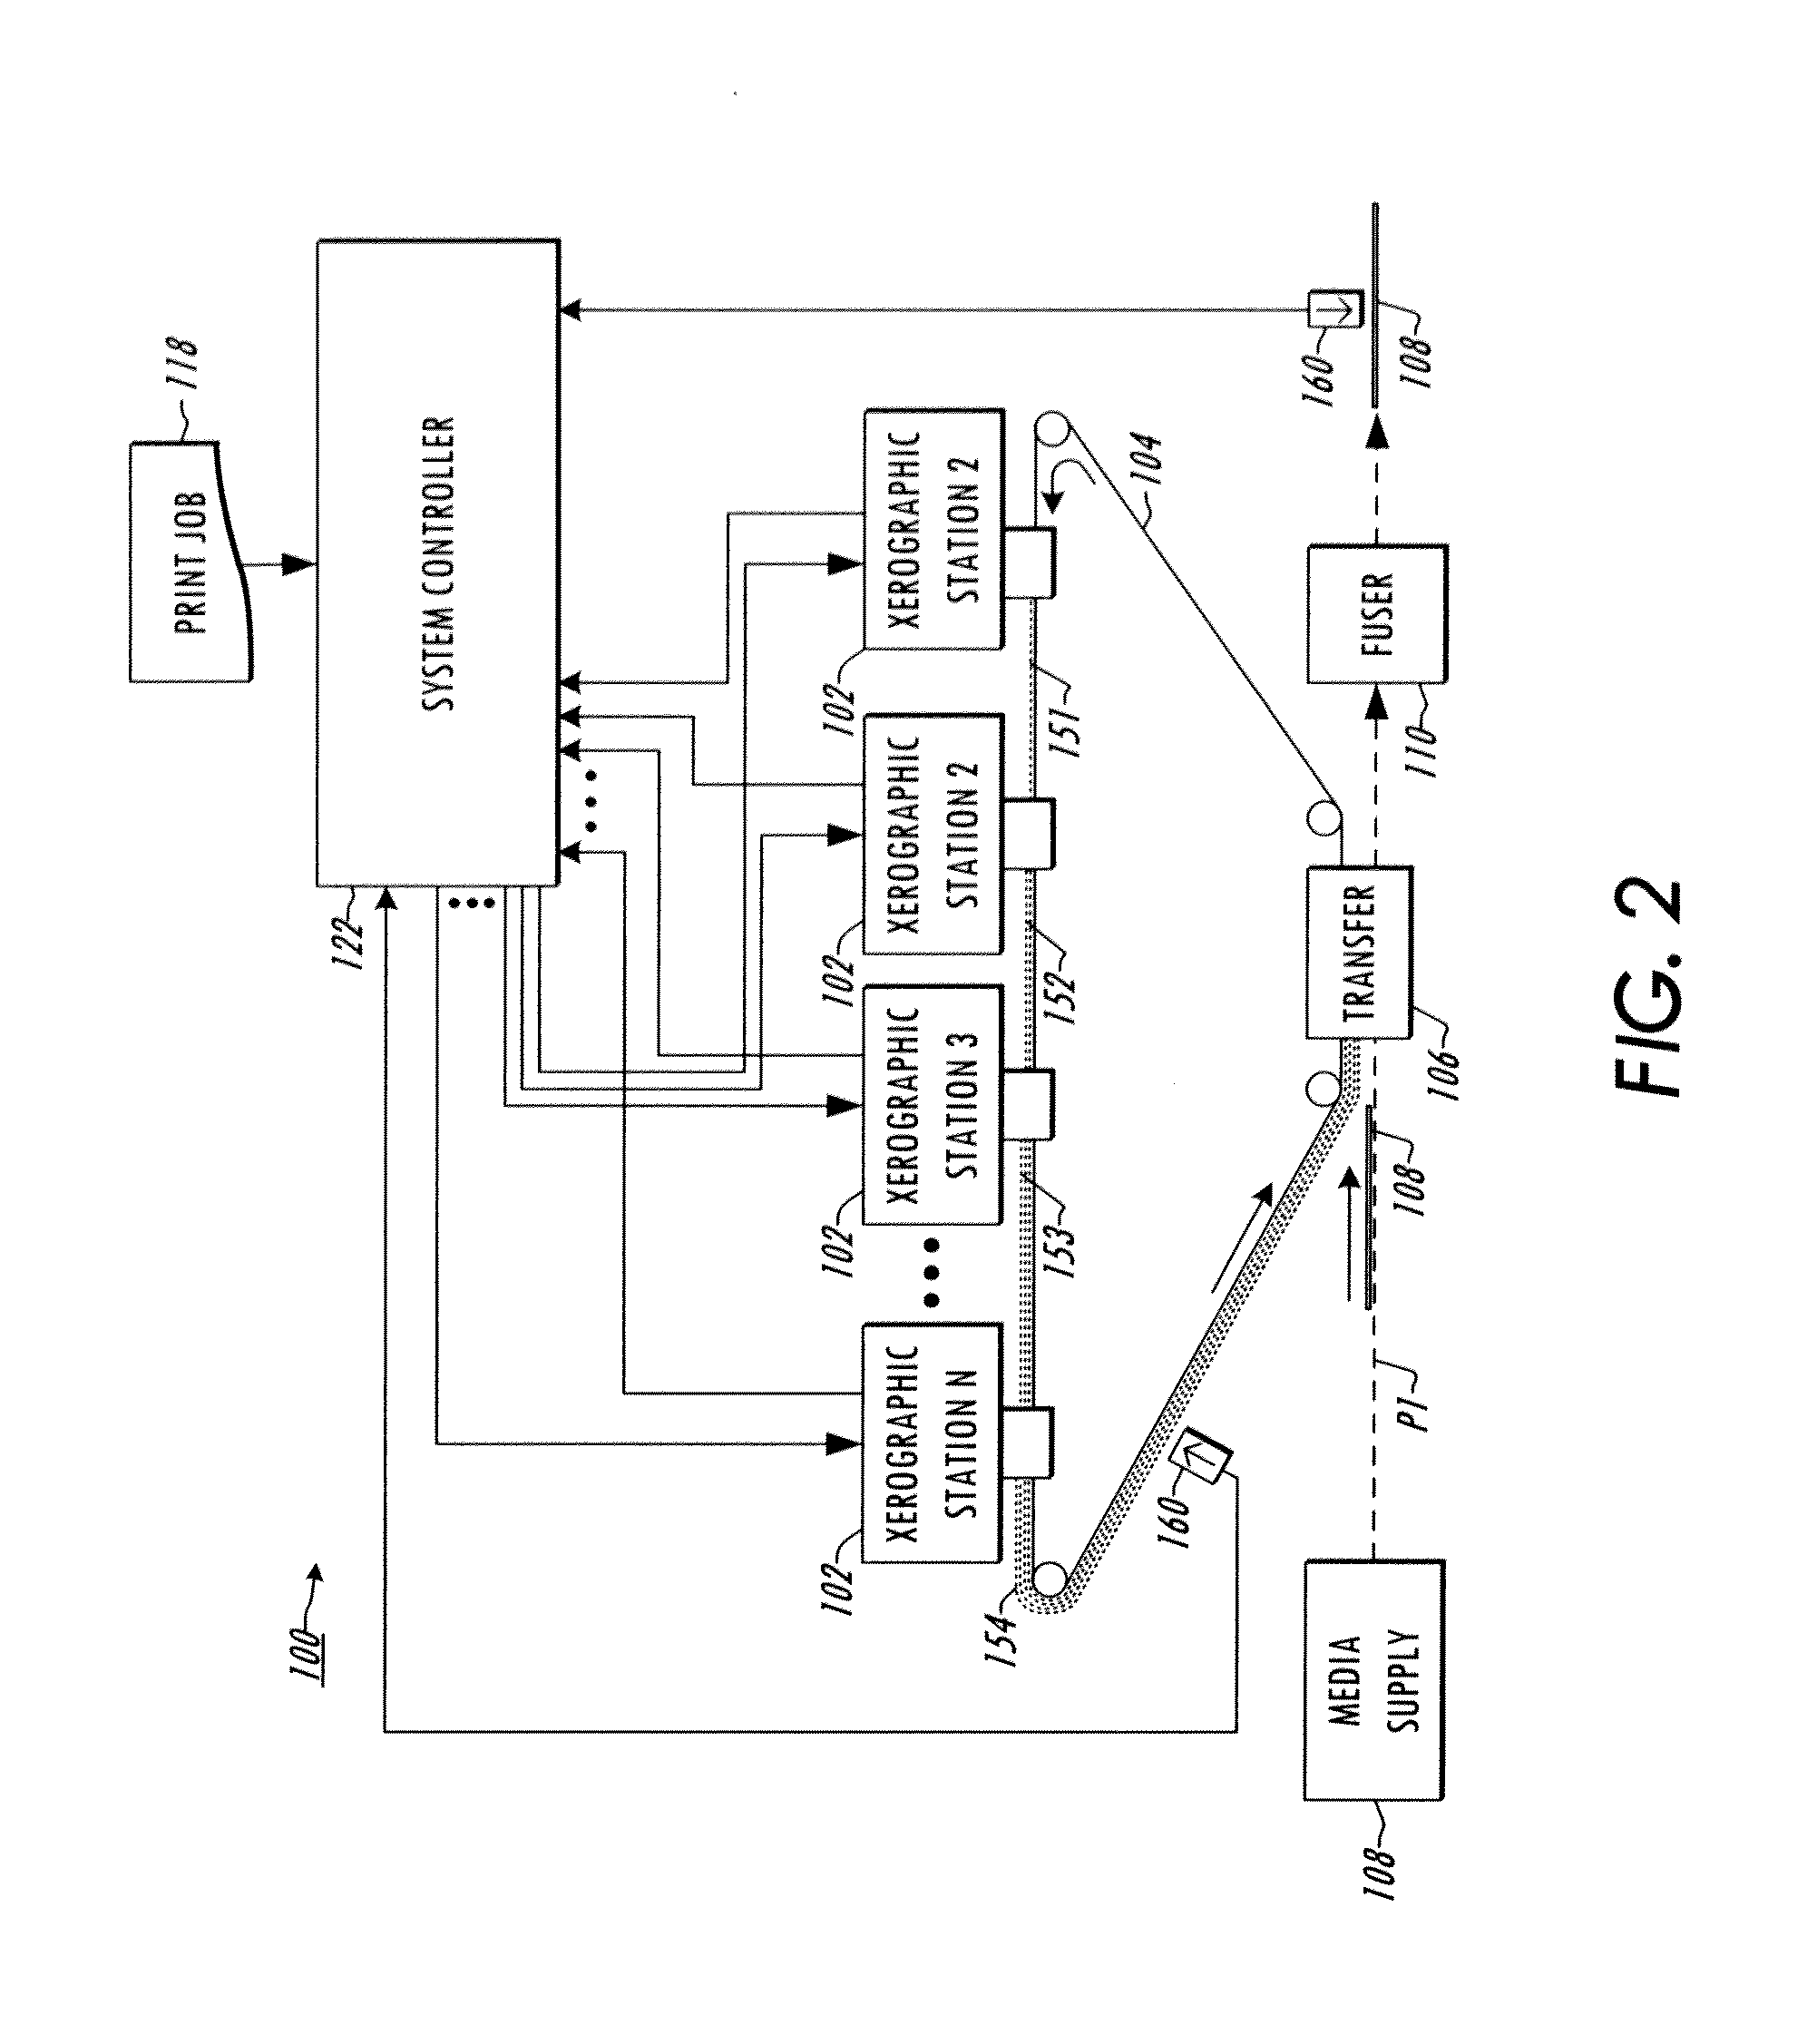 Printing system, raster ouput scanner, and method with electronic banding compensation using facet-dependent smile correction